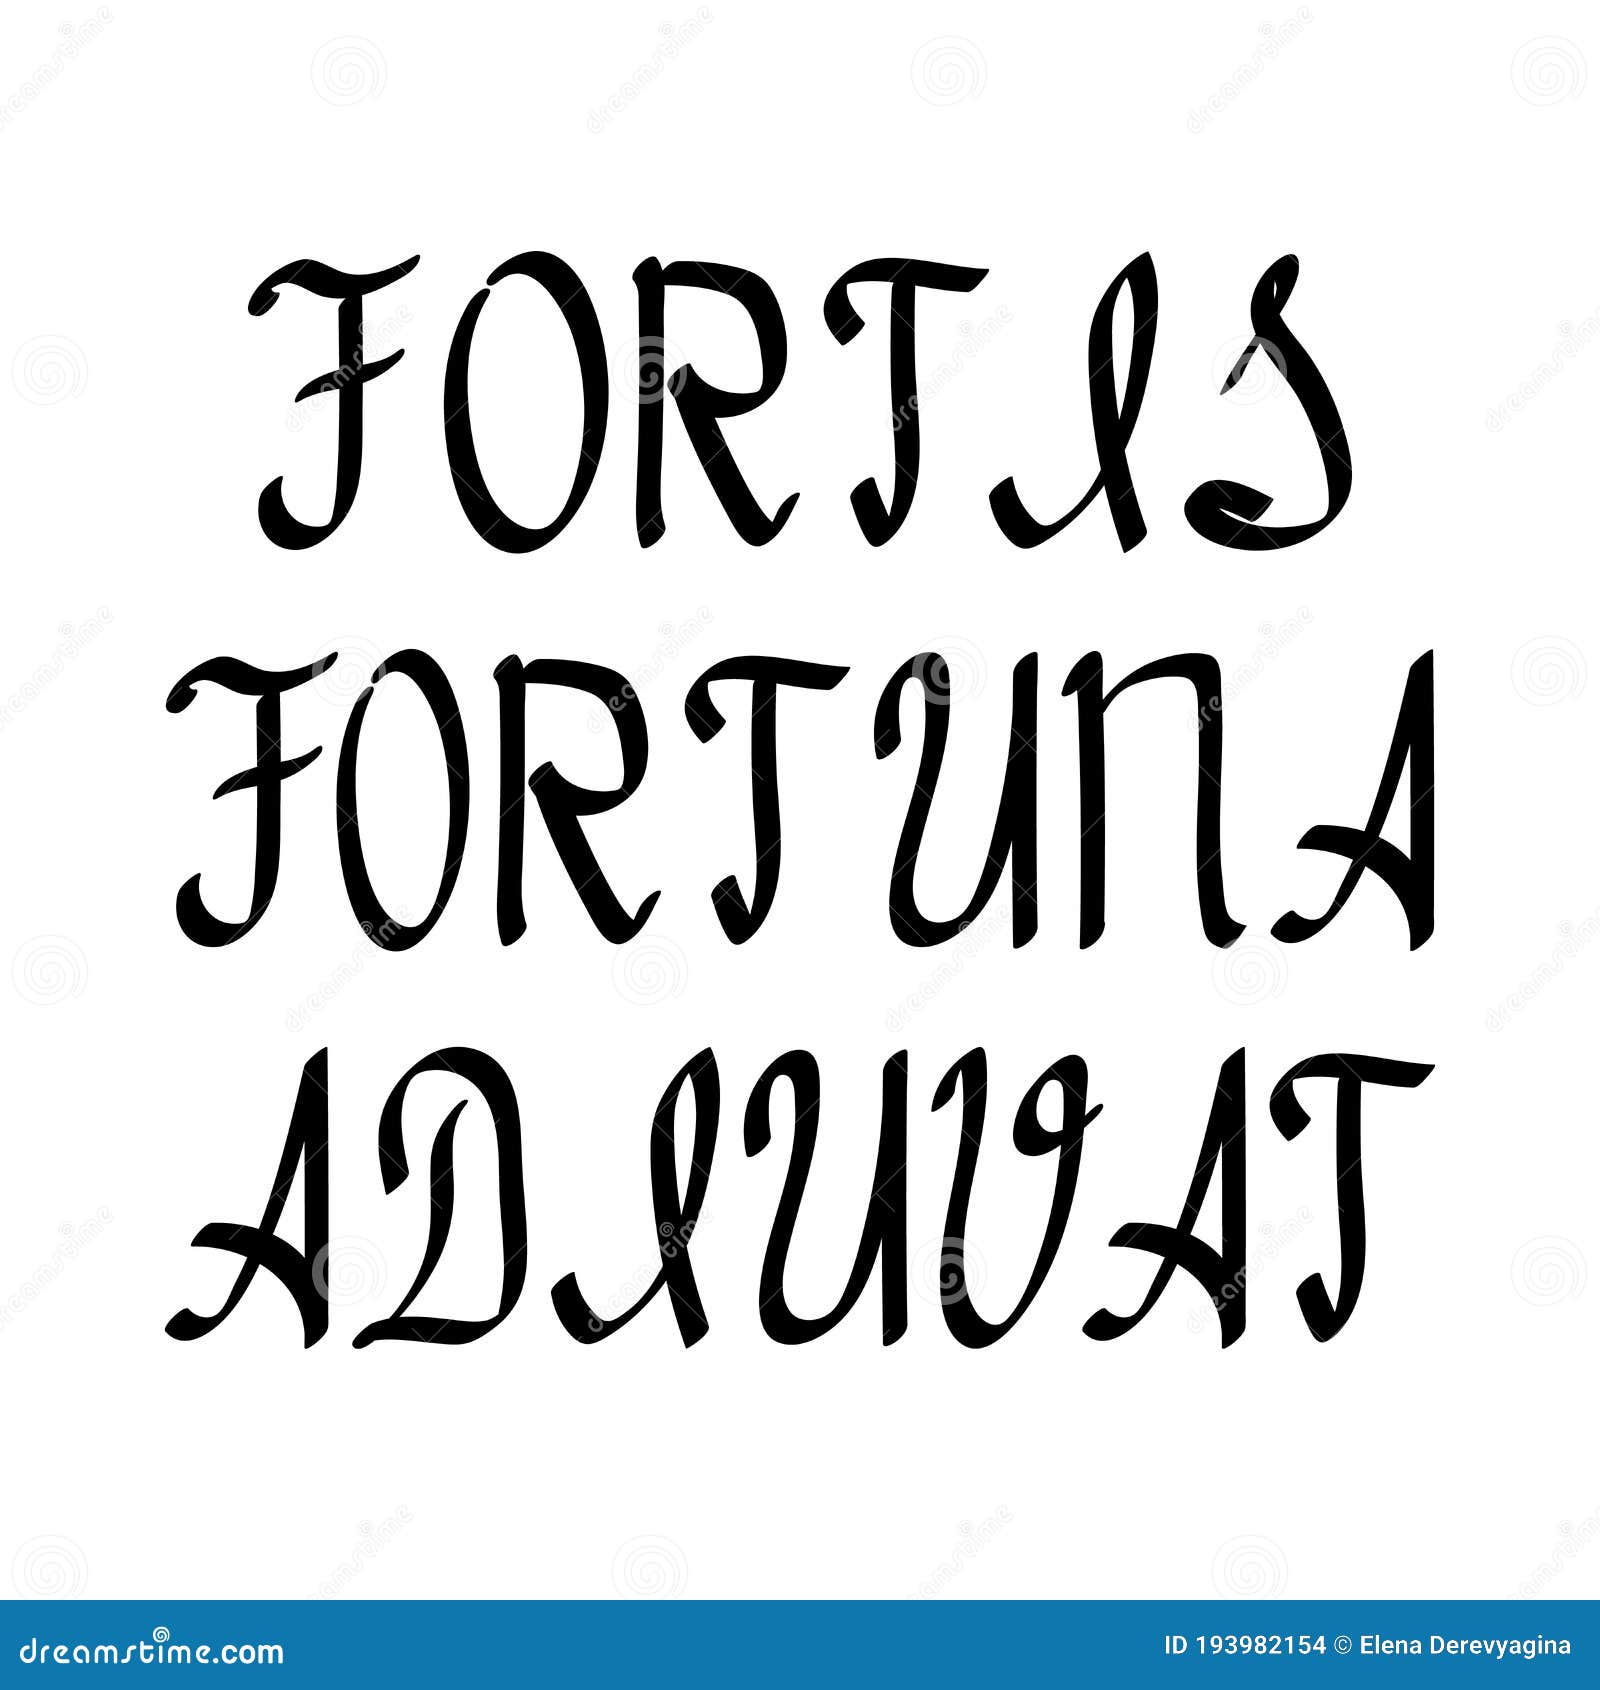 https://thumbs.dreamstime.com/z/fortis-fortuna-adiuvat-saying-meaning-fortune-loves-bold-inscription-latin-letters-black-brush-different-thickness-193982154.jpg